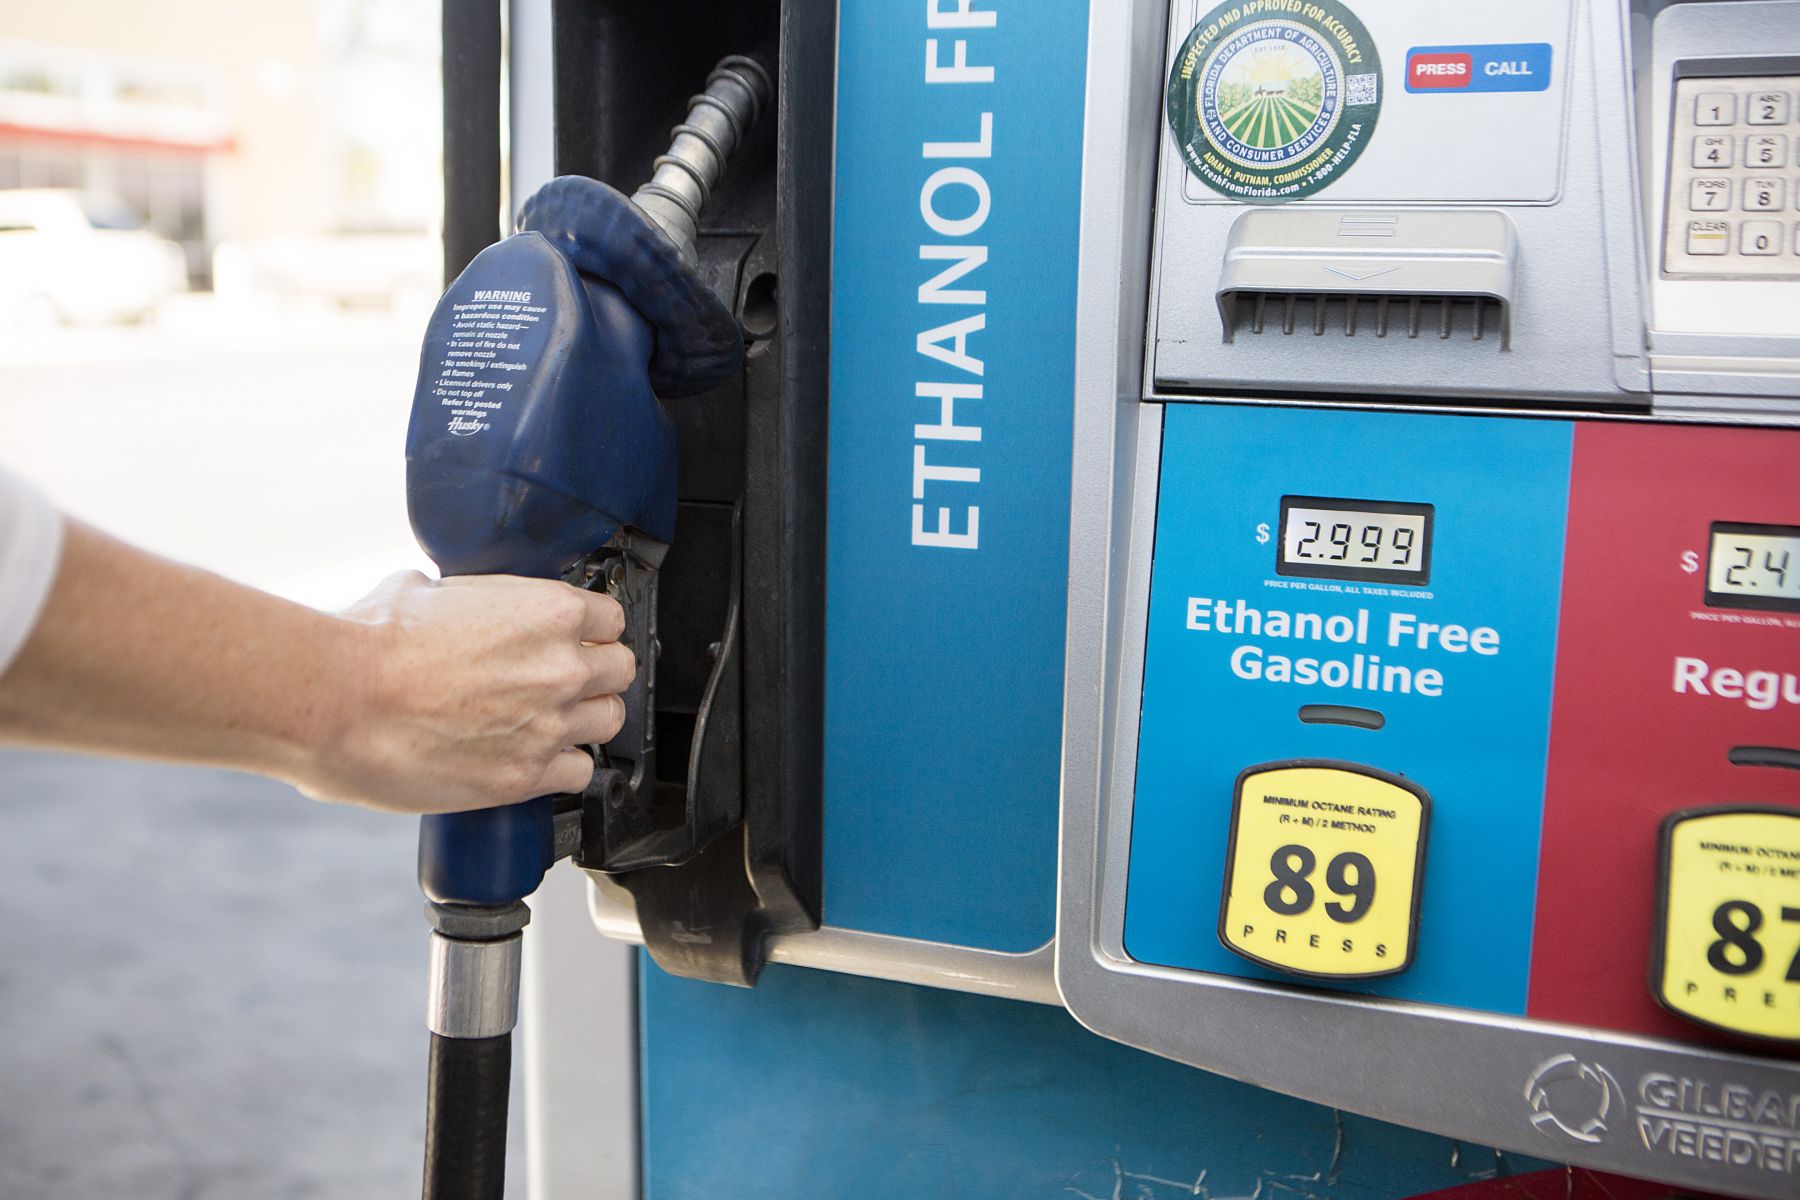 Removing/replacing a nozzle from an ethanol free gas pump.